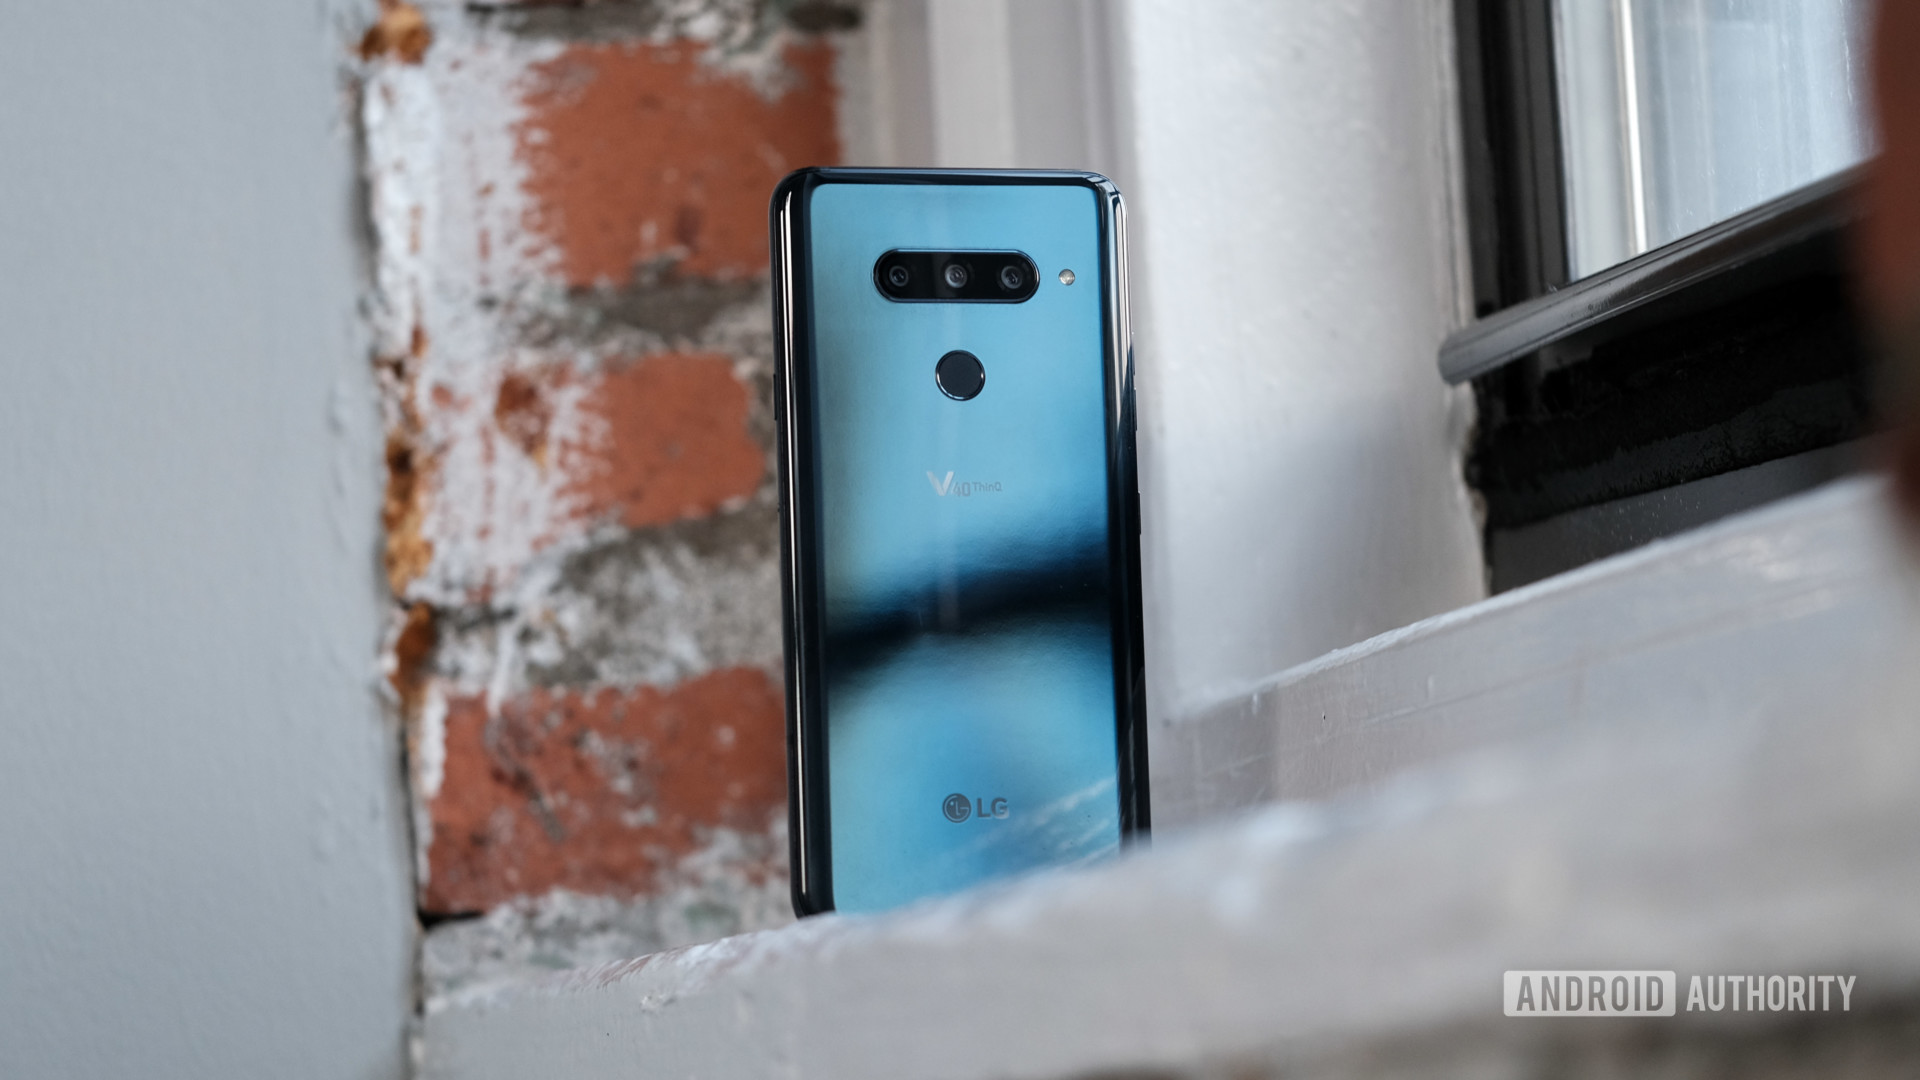 LG V40 ThinQ sitting on a window sill showing back of phone